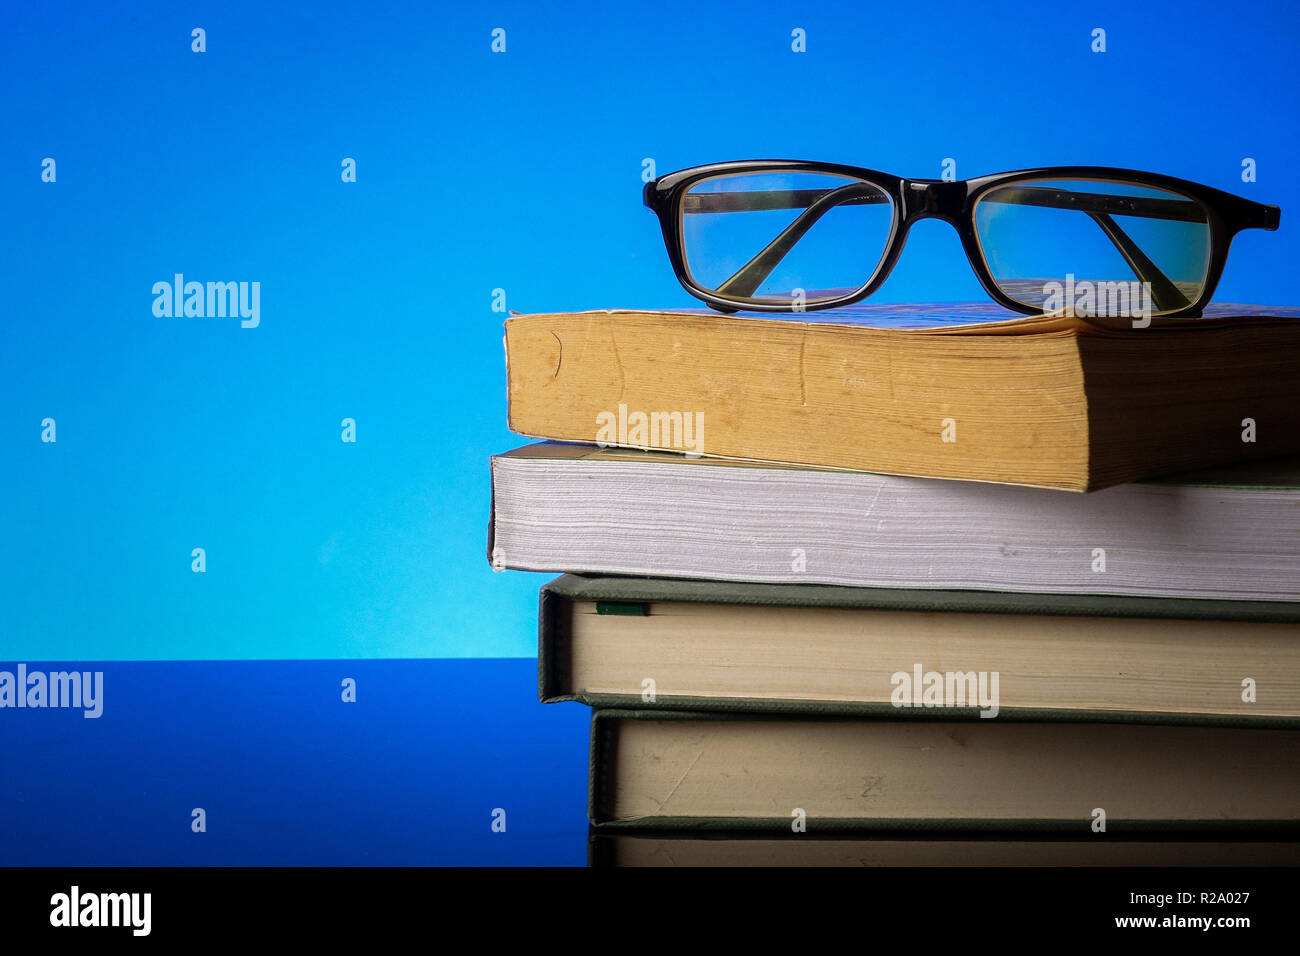 EDUCATION CONCEPT with stack of old book and reading glasses on a blue background. Stock Photo